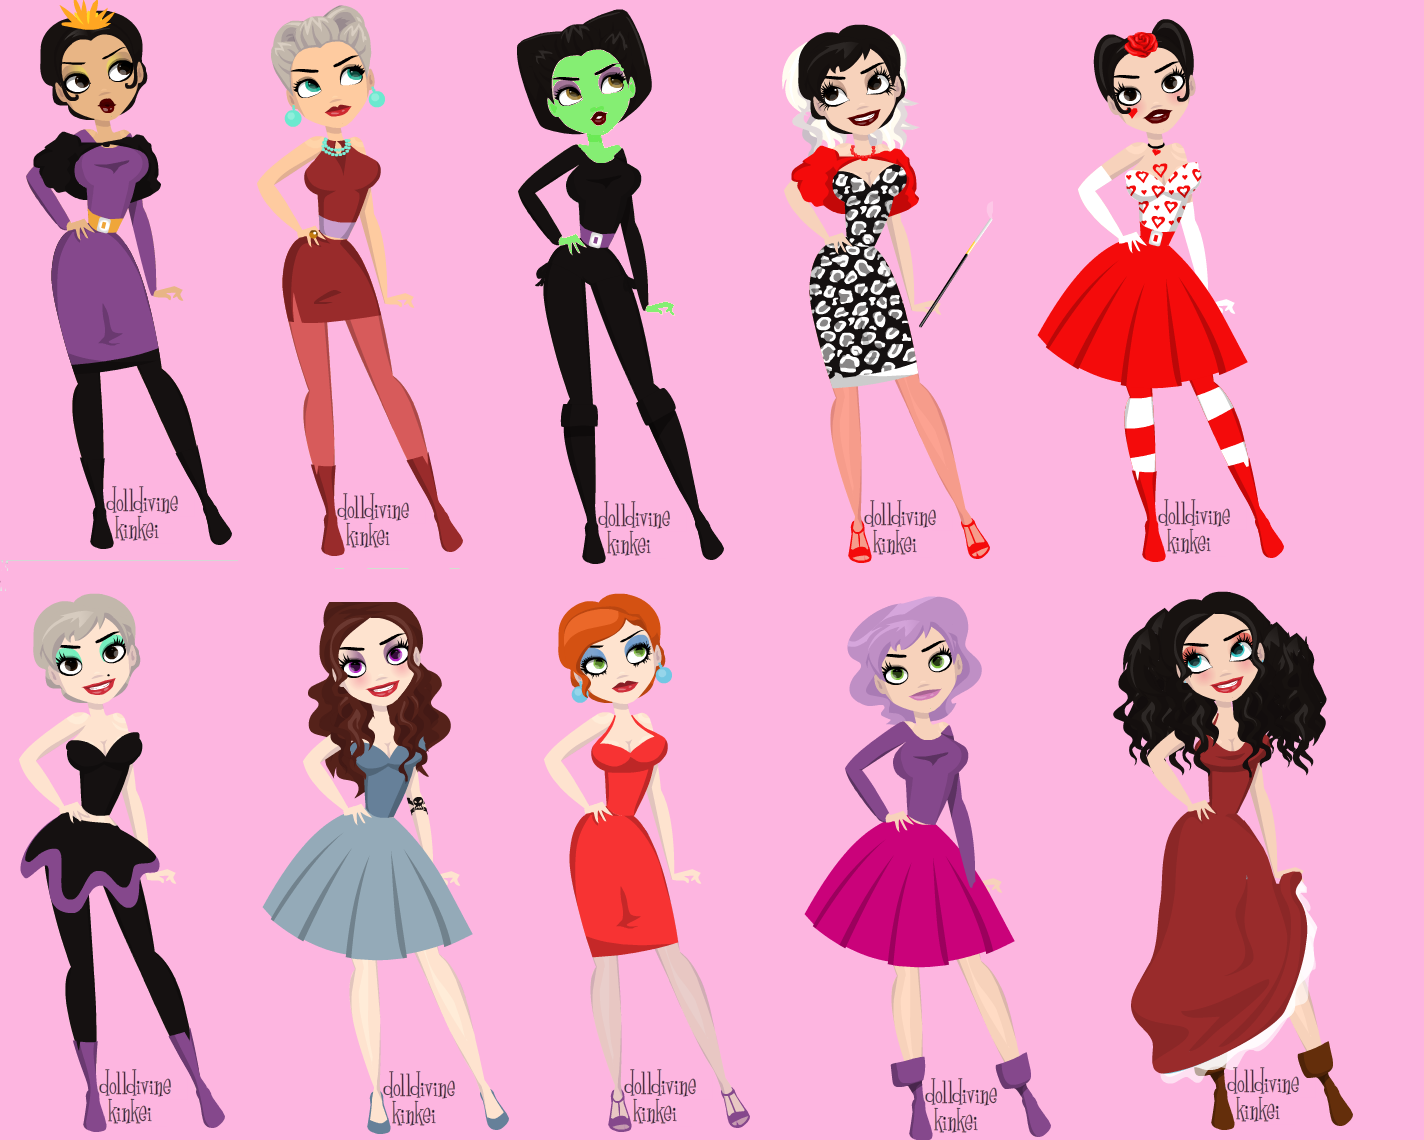 Can You Name All These Disney Villains?